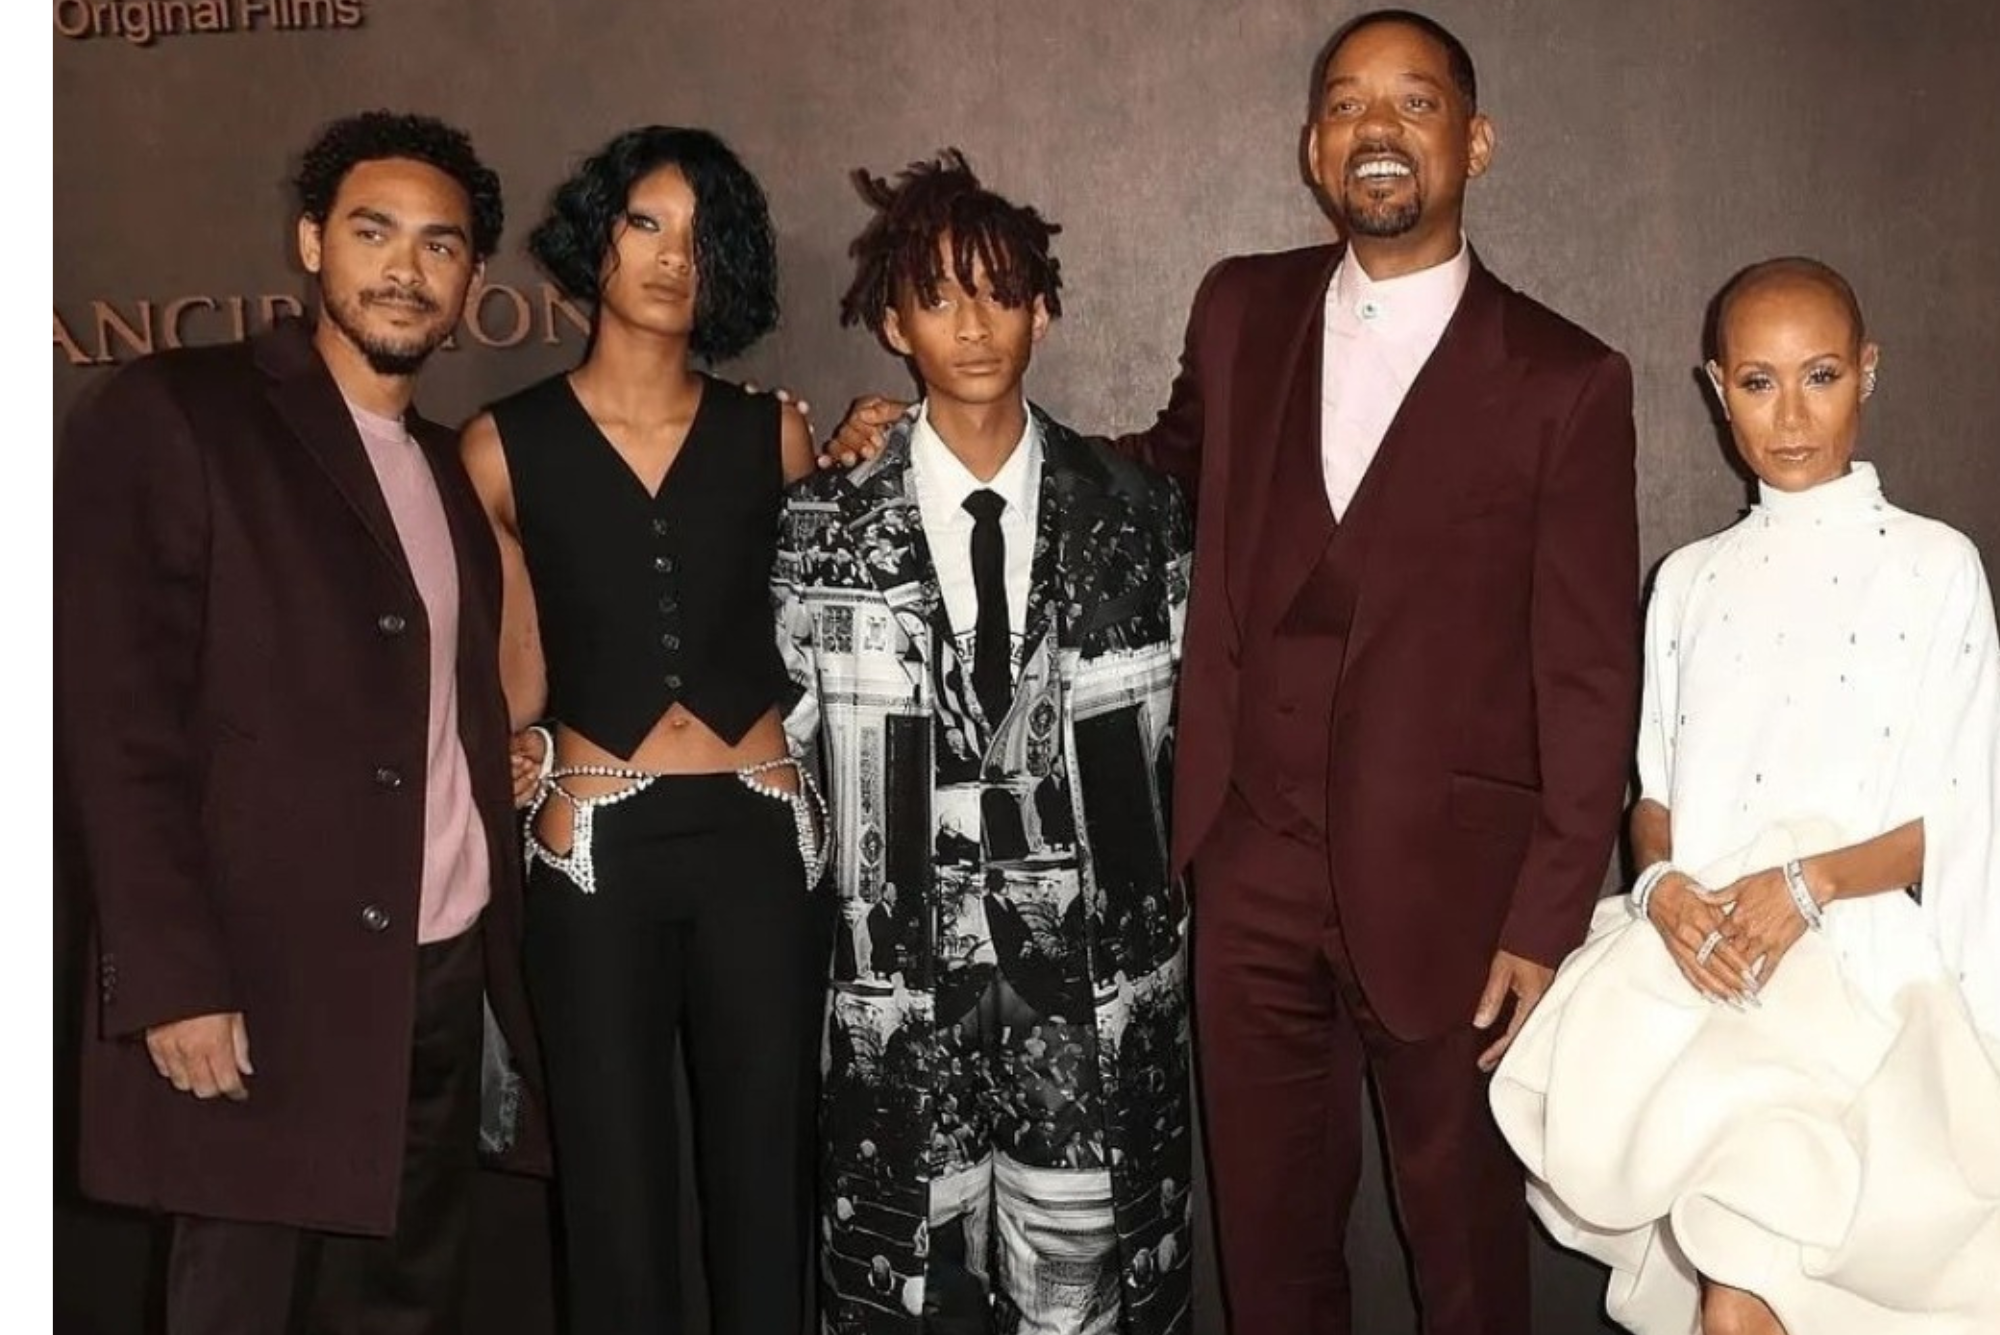 Will Smith recognizes his children as having a very special quality as the family gathers for Jada Smith’s Red Table Talk

+2023